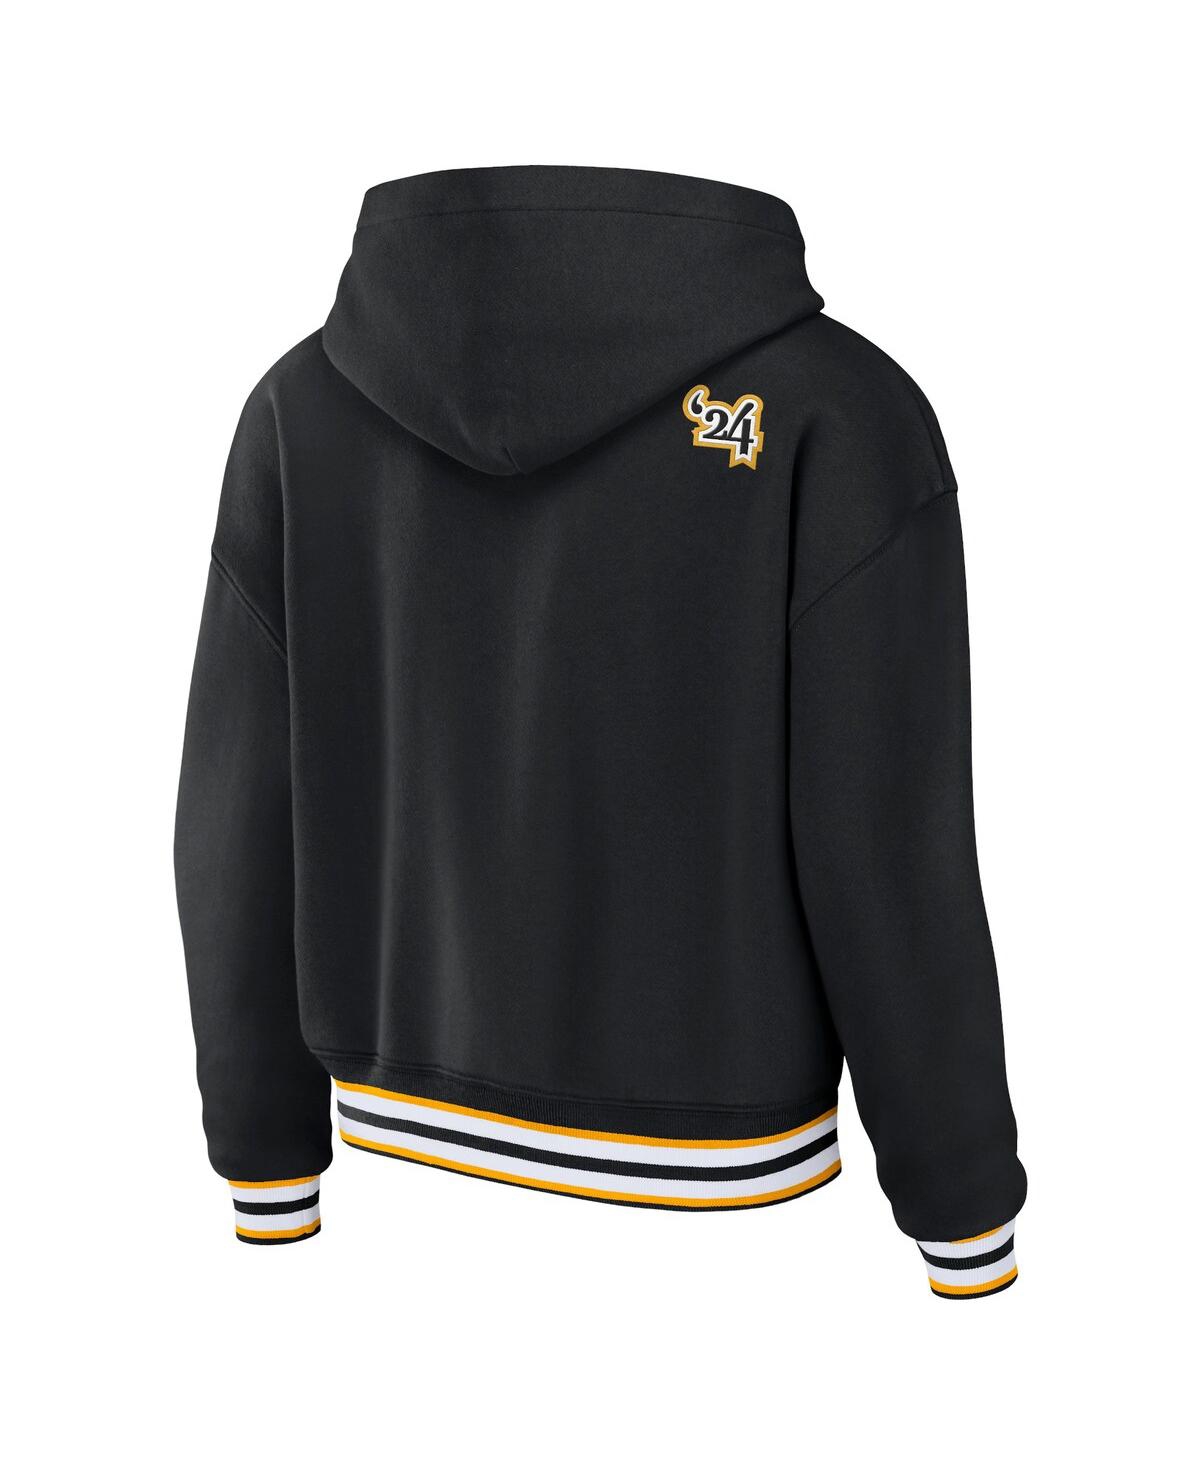 Shop Wear By Erin Andrews Women's  Black Boston Bruins Lace-up Pullover Hoodie